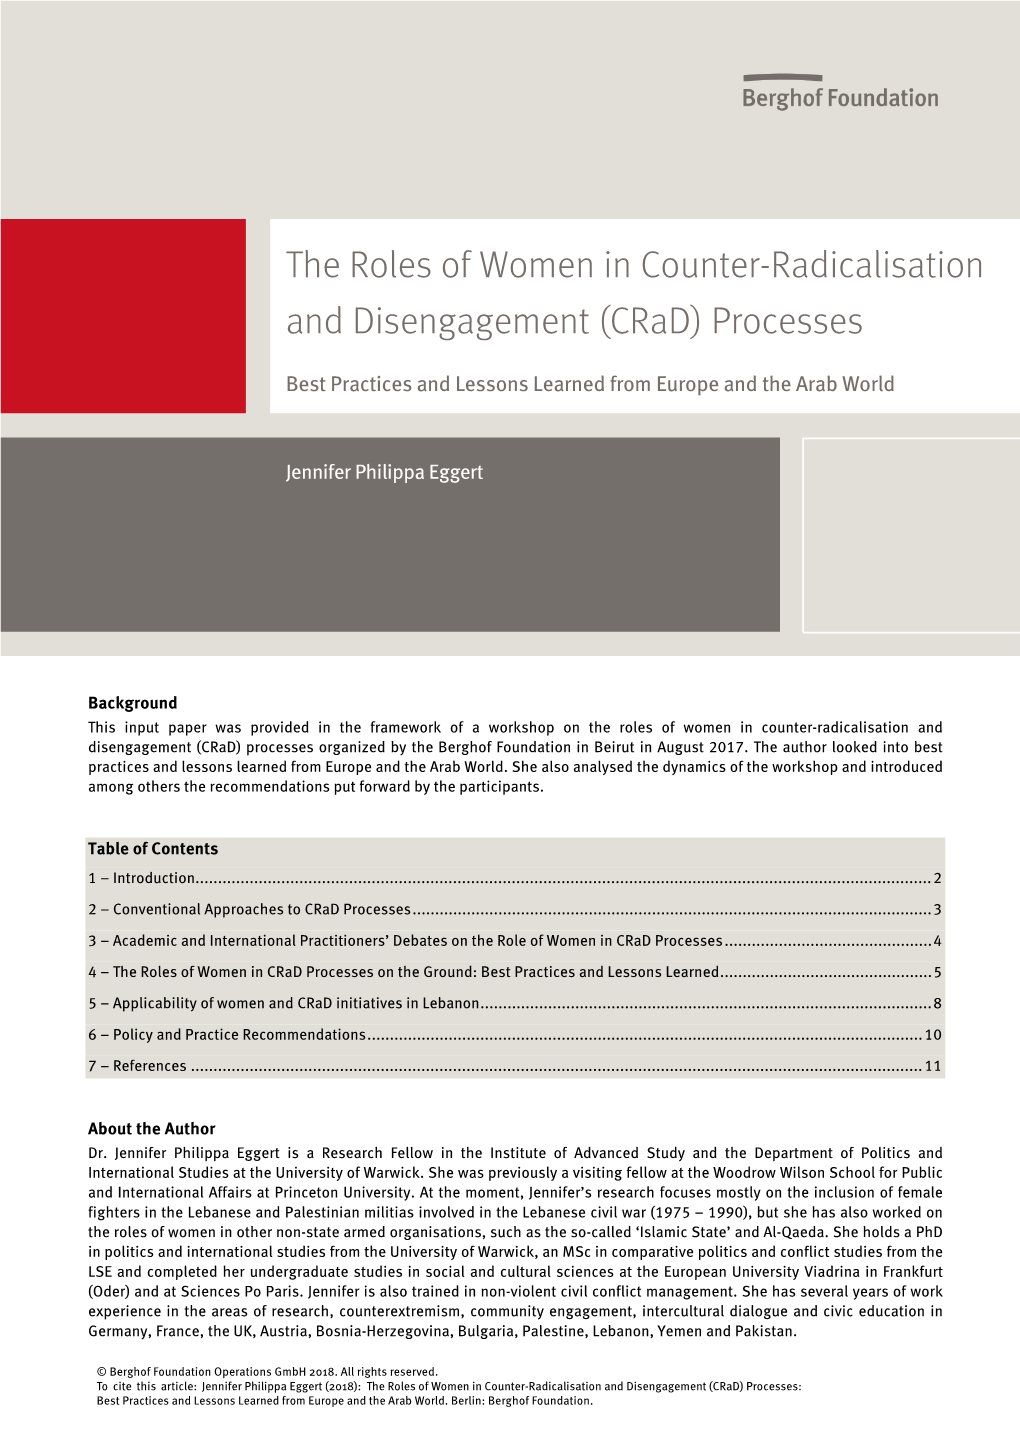 The Roles of Women in Counter-Radicalisation and Disengagement (Crad) Processes